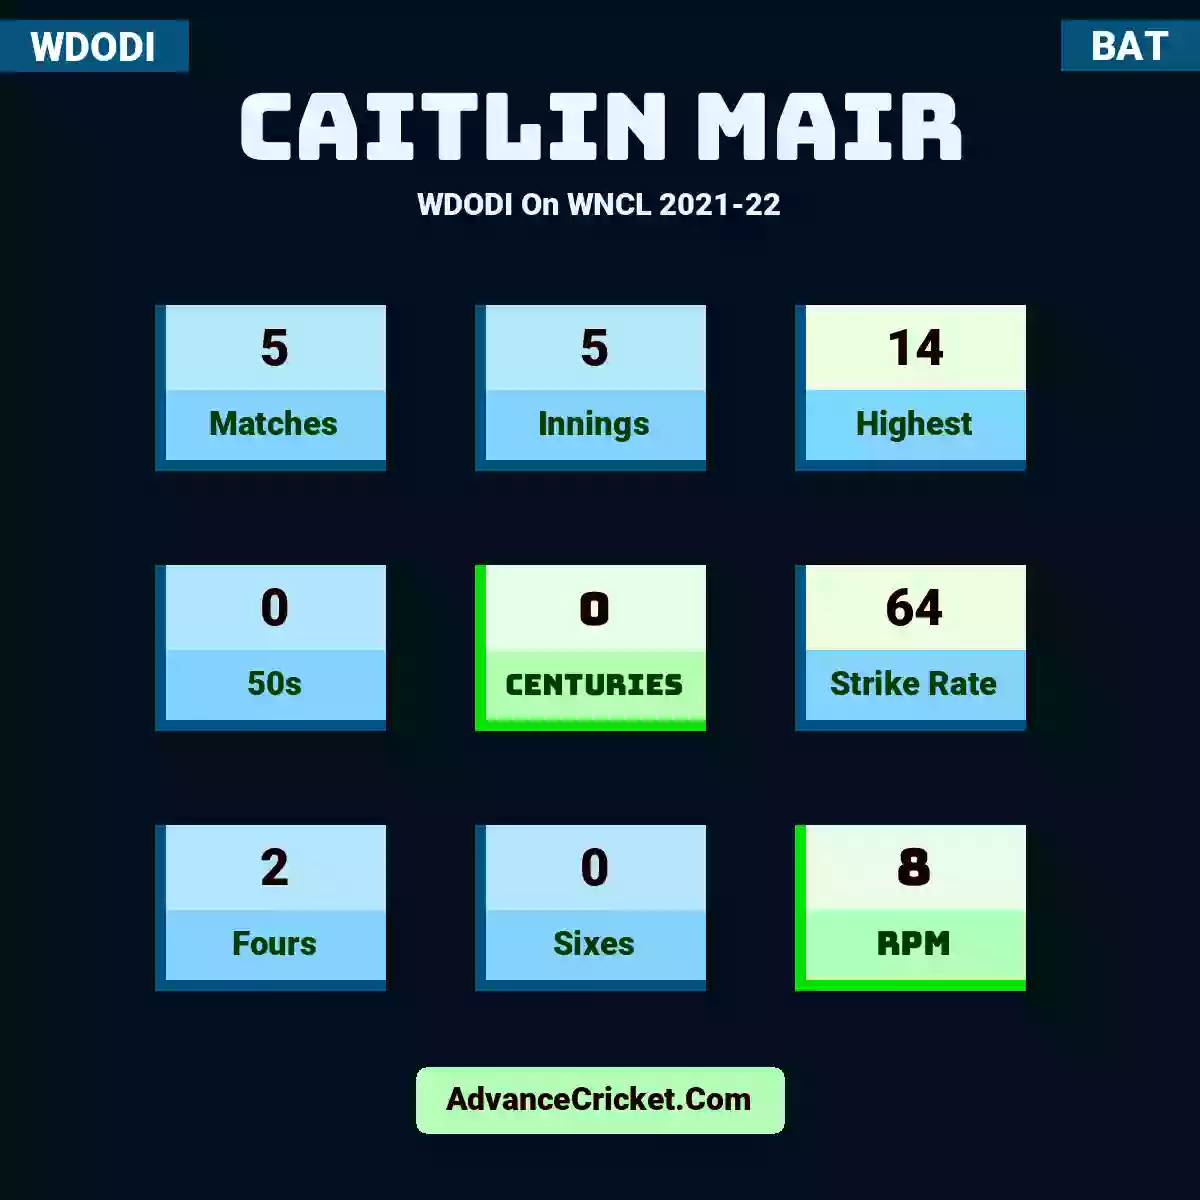 Caitlin Mair WDODI  On WNCL 2021-22, Caitlin Mair played 5 matches, scored 14 runs as highest, 0 half-centuries, and 0 centuries, with a strike rate of 64. C.Mair hit 2 fours and 0 sixes, with an RPM of 8.